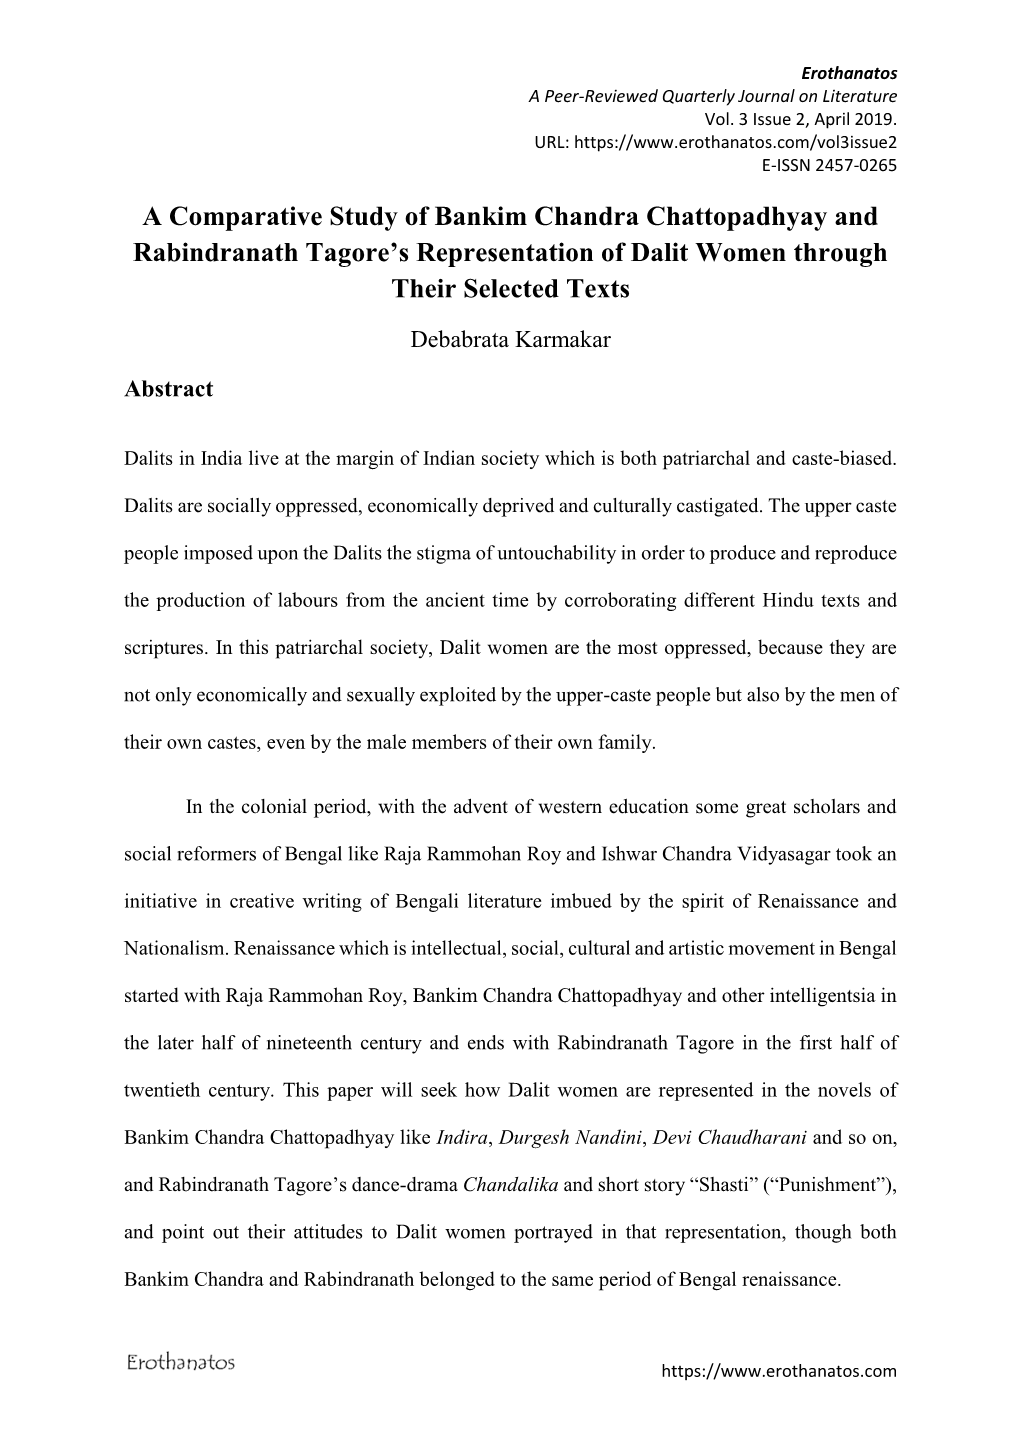 A Comparative Study of Bankim Chandra Chattopadhyay and Rabindranath Tagore’S Representation of Dalit Women Through Their Selected Texts